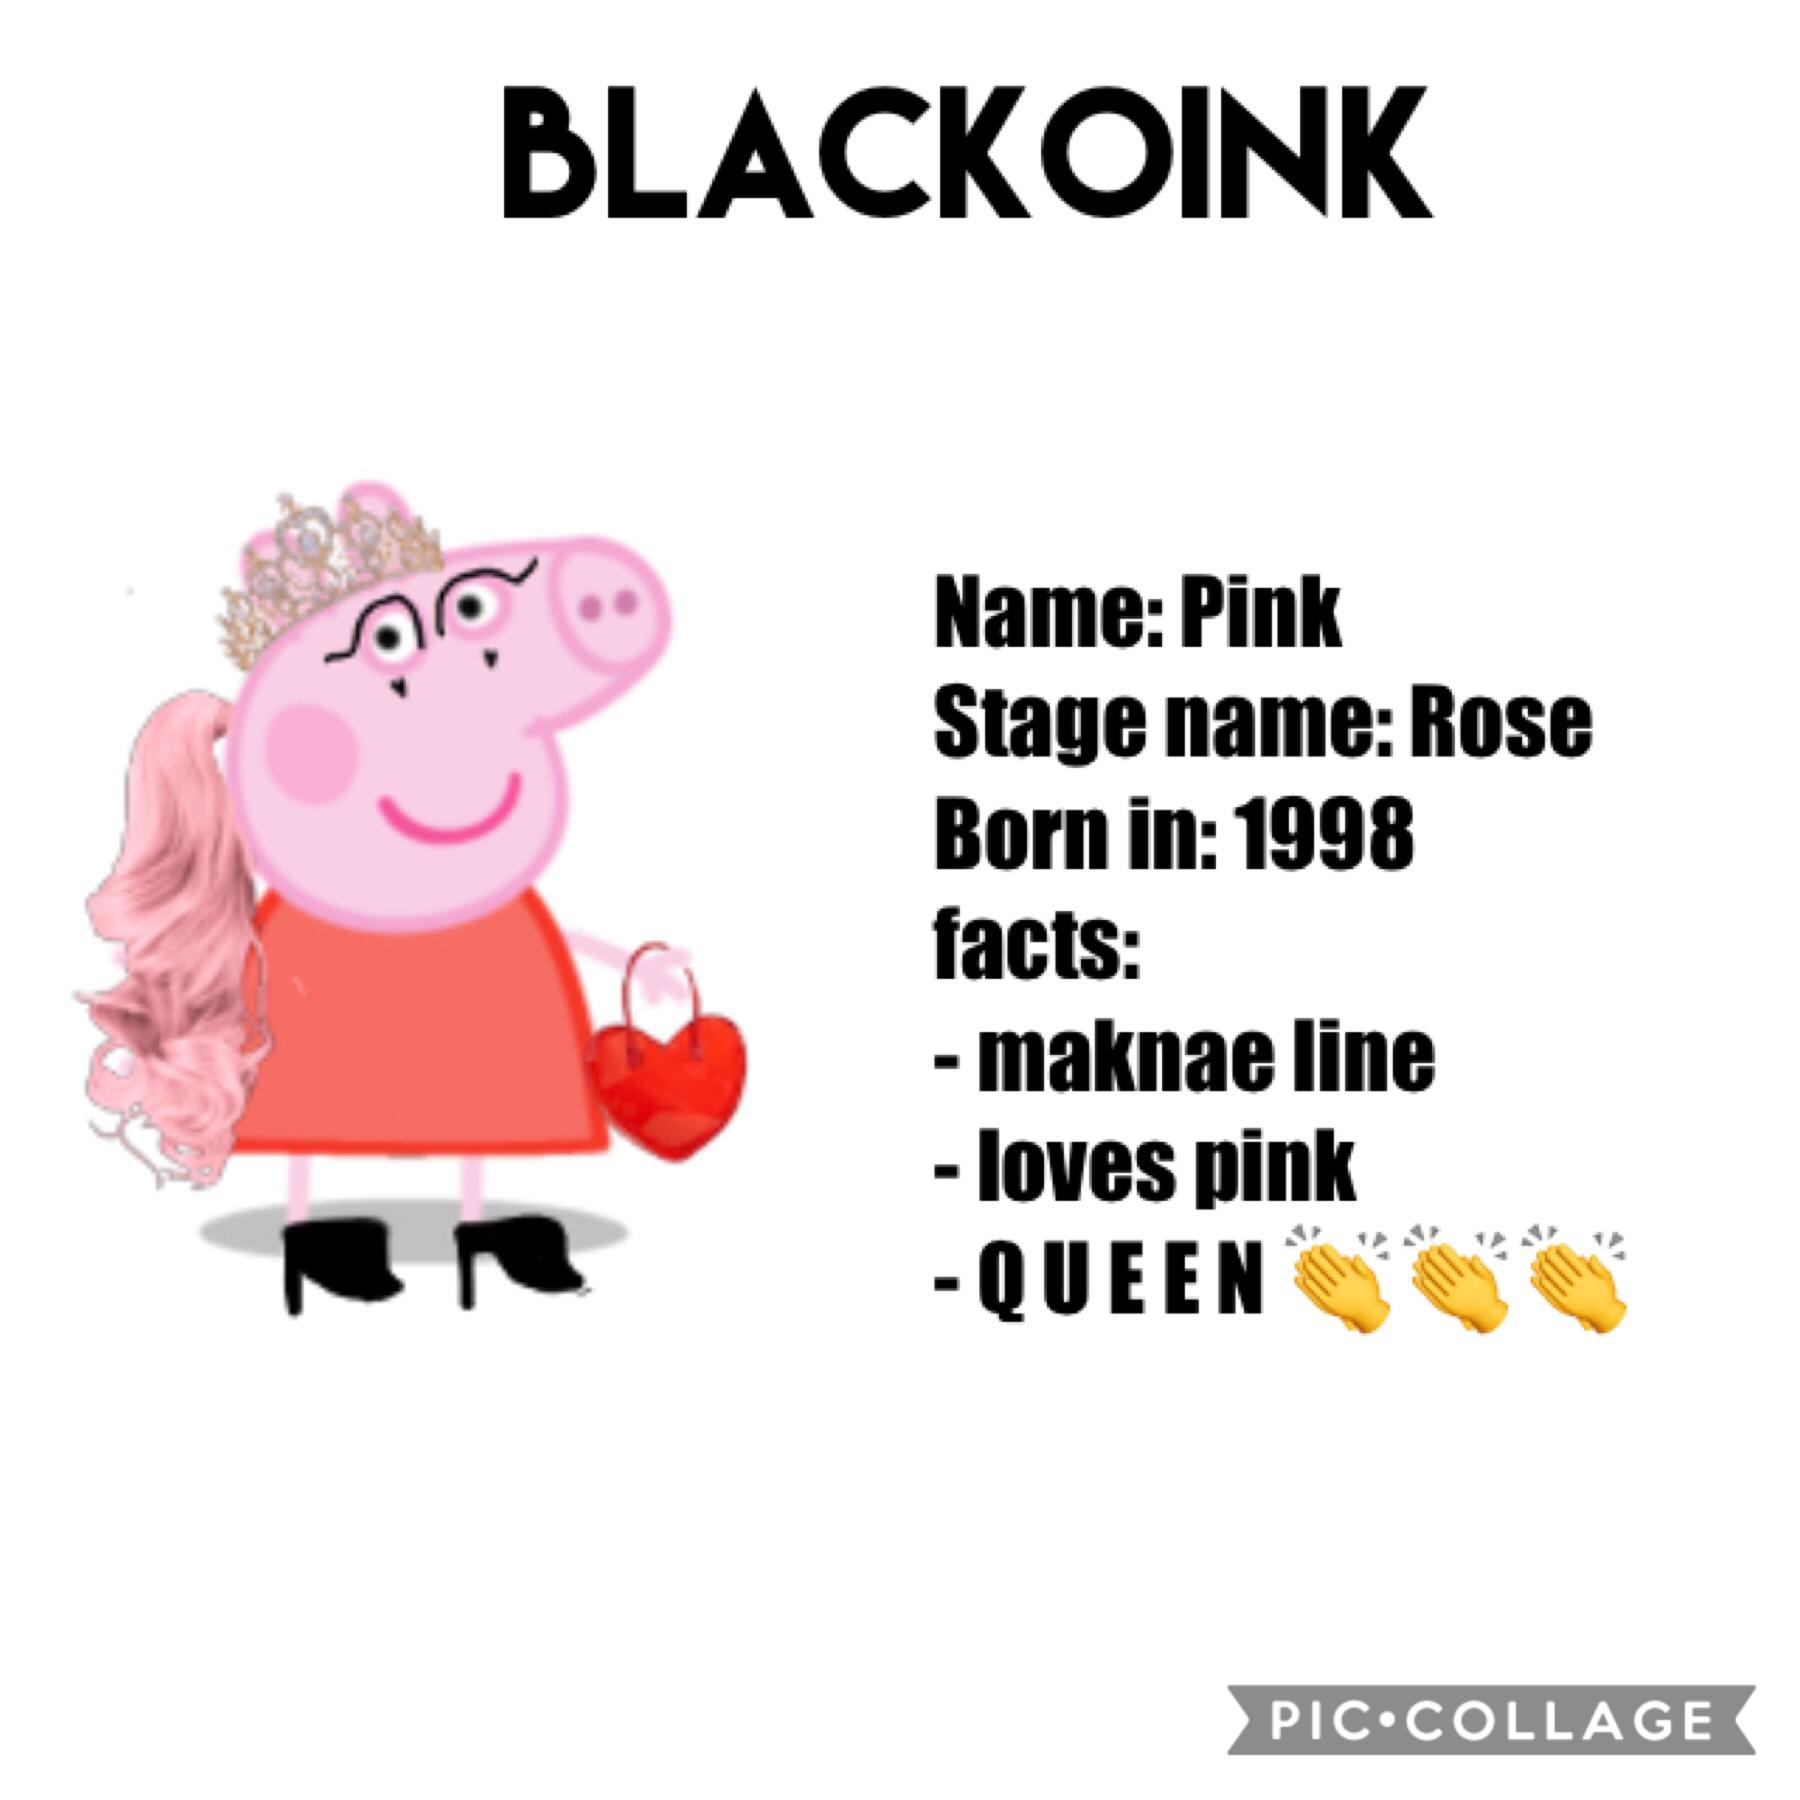 stan BlackOink y’all really b sleeping on talented queens smh